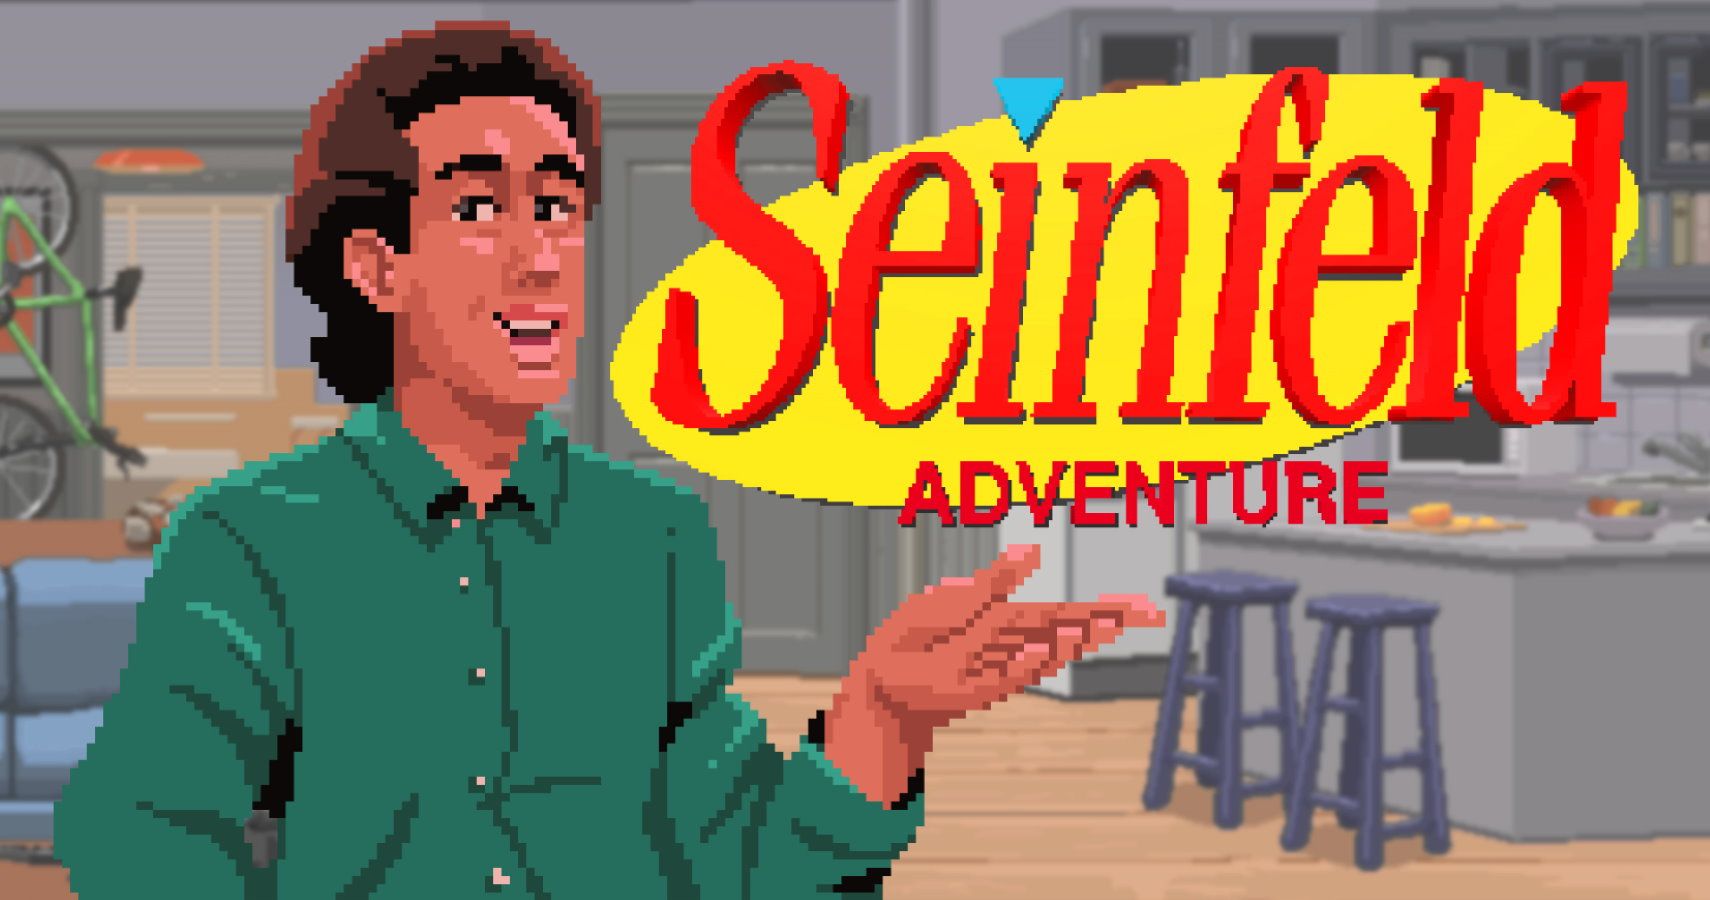 seinfeld master of my domain episode